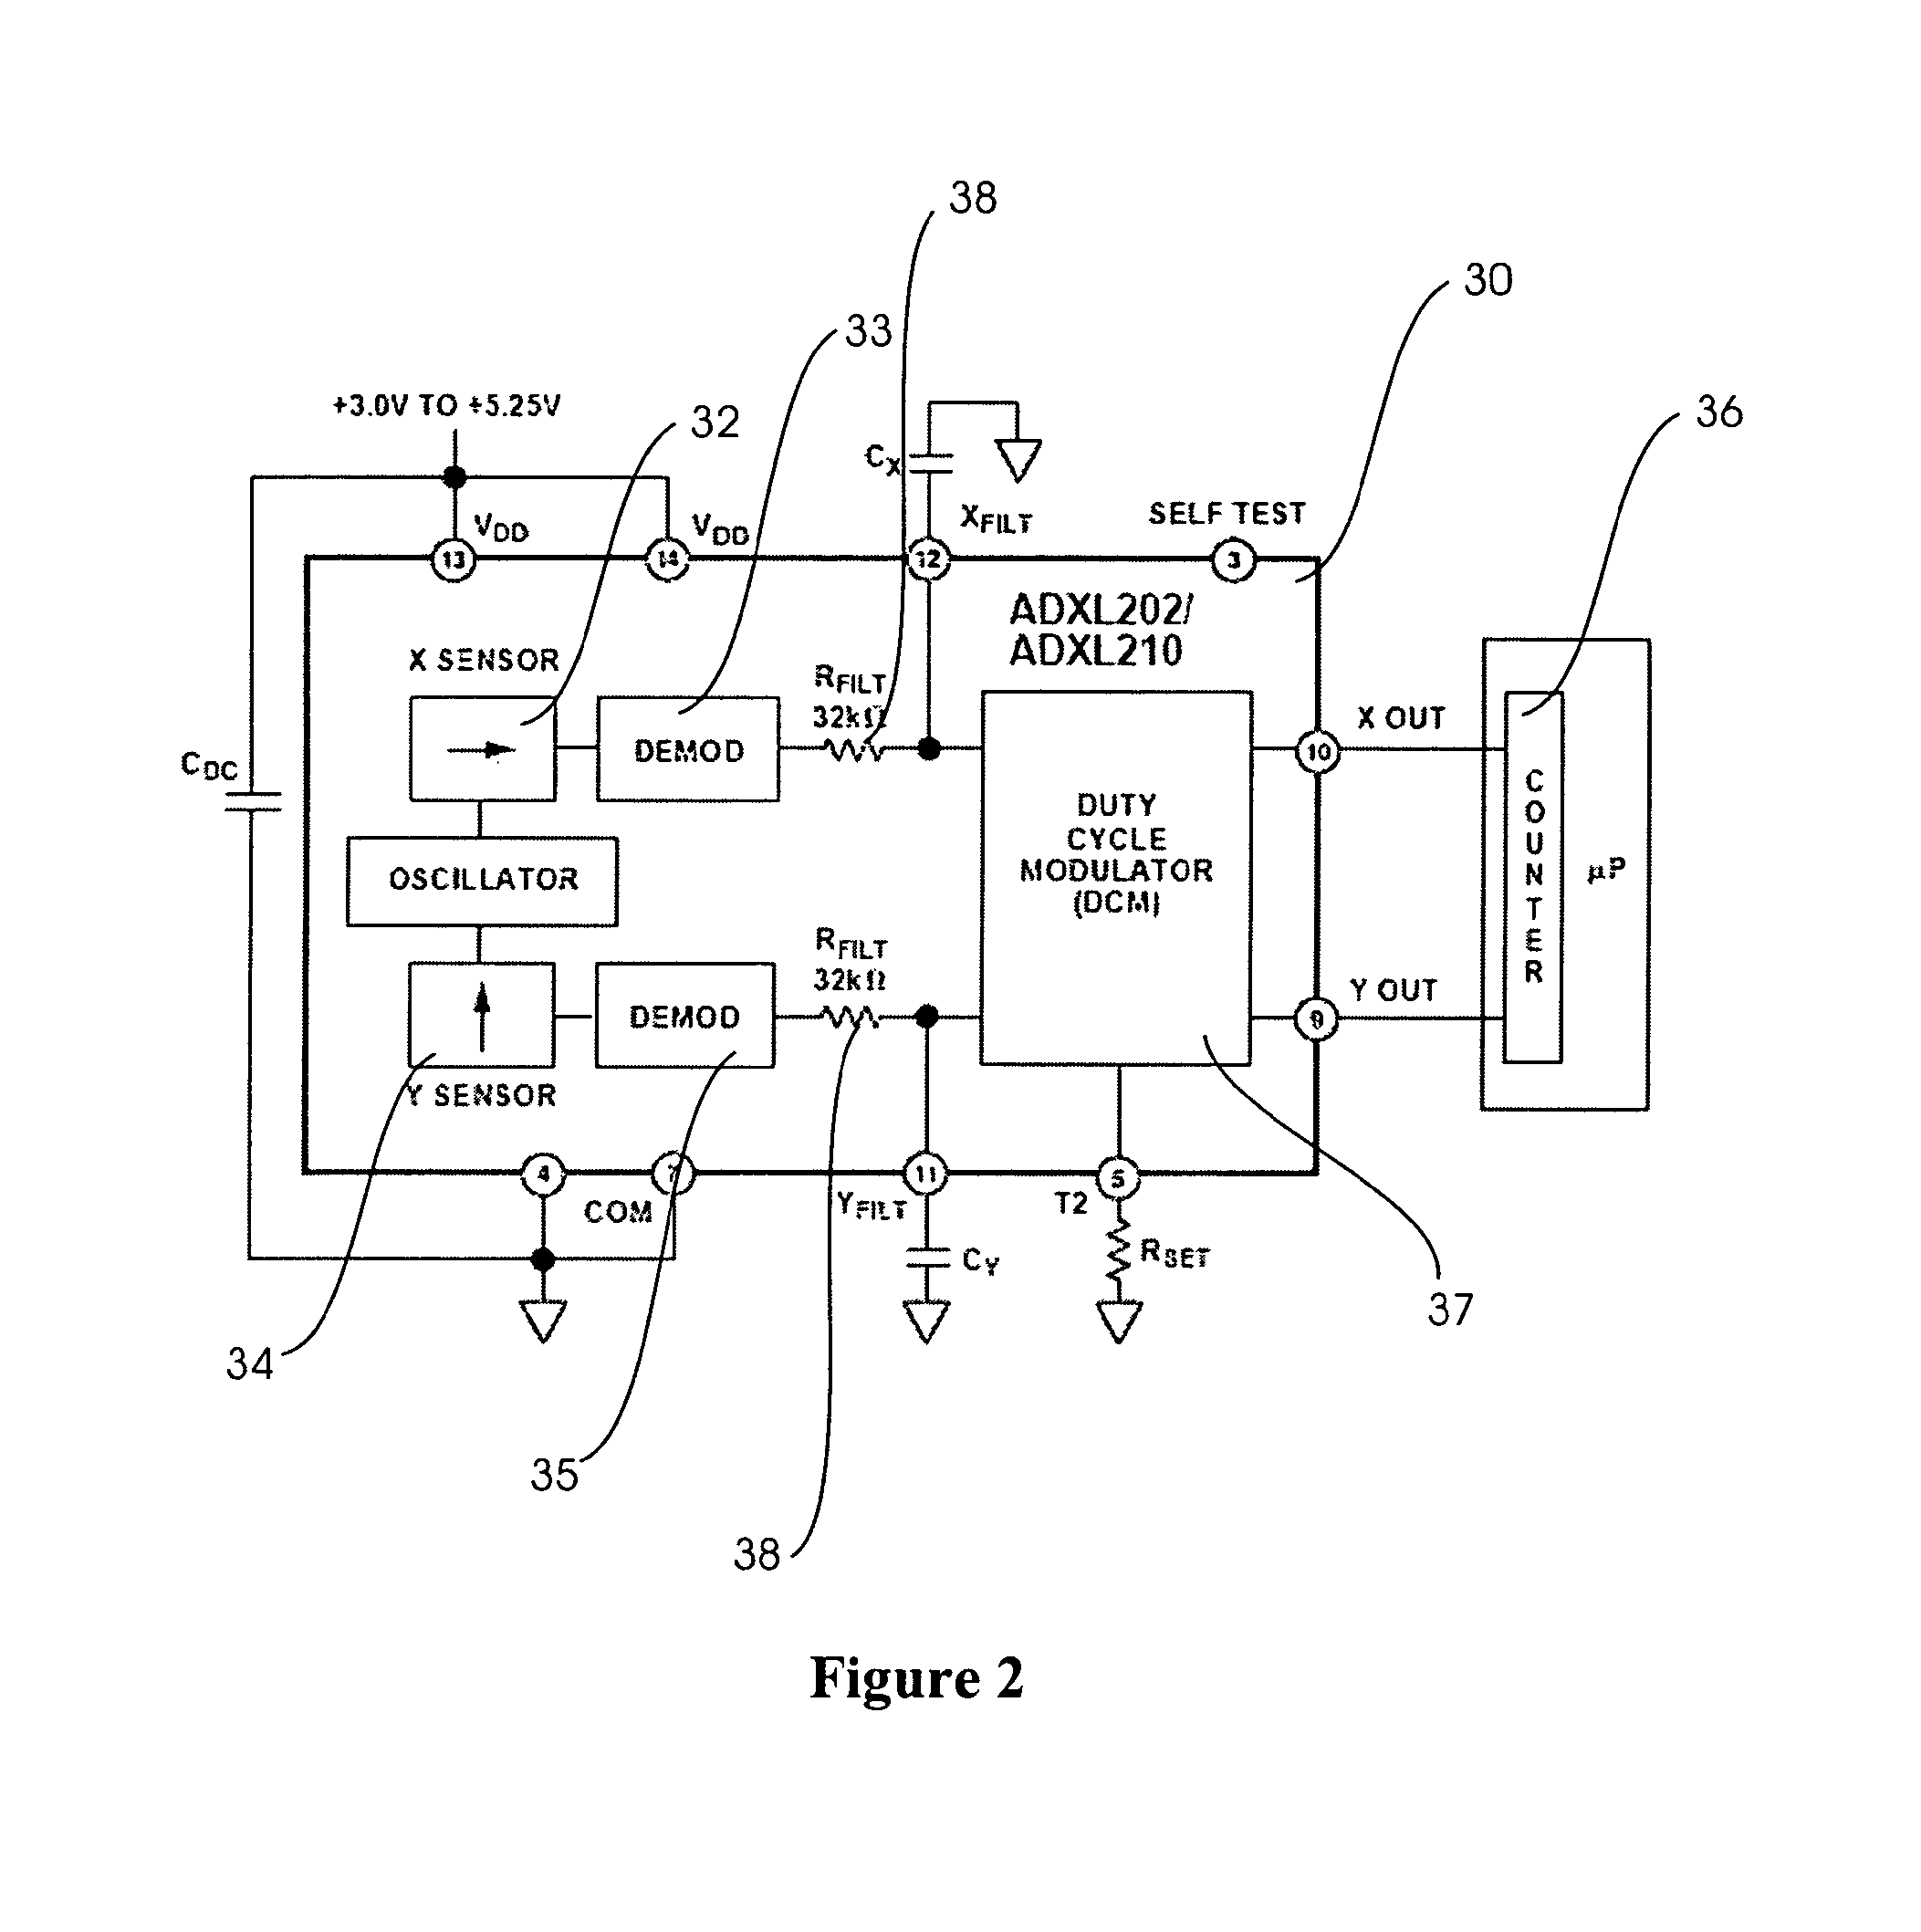 Movement disorder monitoring system and method